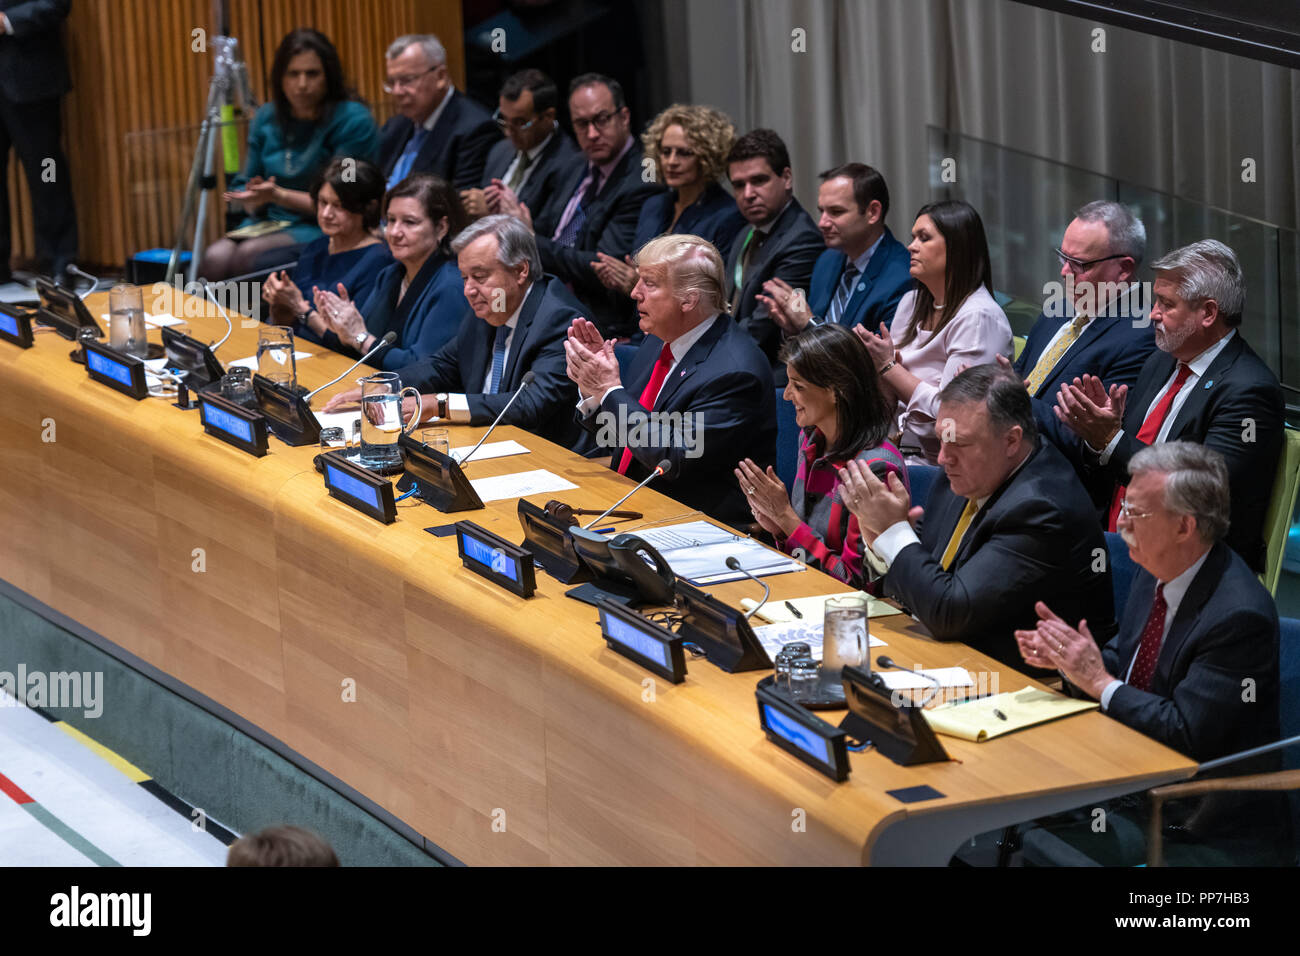 New York, USA, 24 September 2018. United Nations Secretary General António Guterres is applauded by the US President Donald Trump after addressing a high-level event on countering narcotics convened by the United States delegation at their headquarters in New York. Next to Tump are:  US Ambassador Nikki Haley, US Secretary of State Mike Pompeo and US National Security Adviser John Bolton. Trump presented his Global Call to Action on the World Drug Problem. Photo by Enrique Shore Credit: Enrique Shore/Alamy Live News Stock Photo